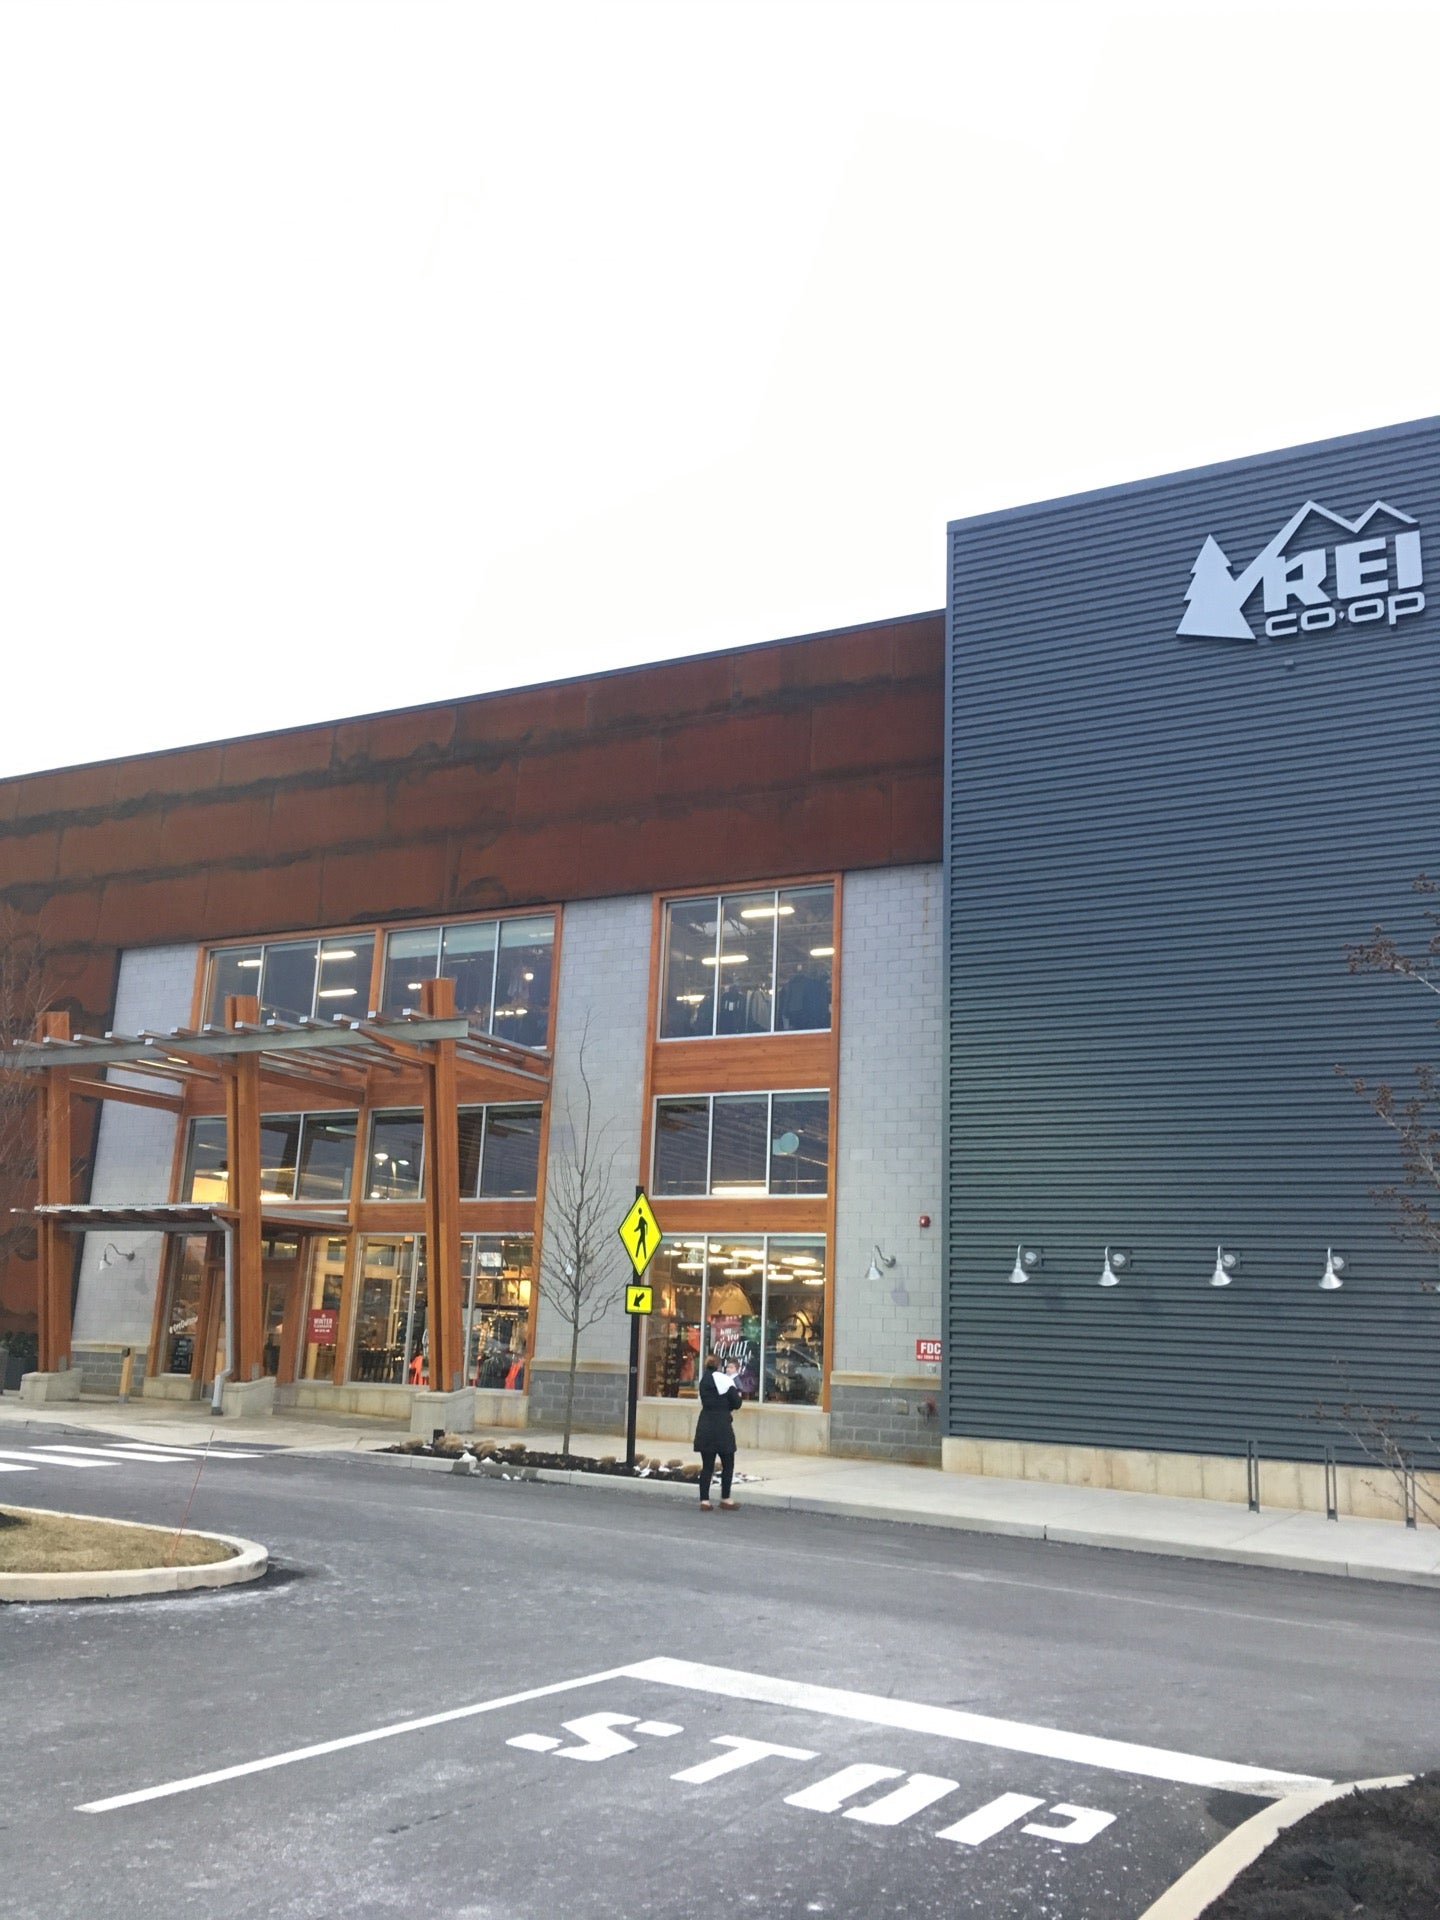 REI King of Prussia Store - King of Prussia, PA - Sporting Goods